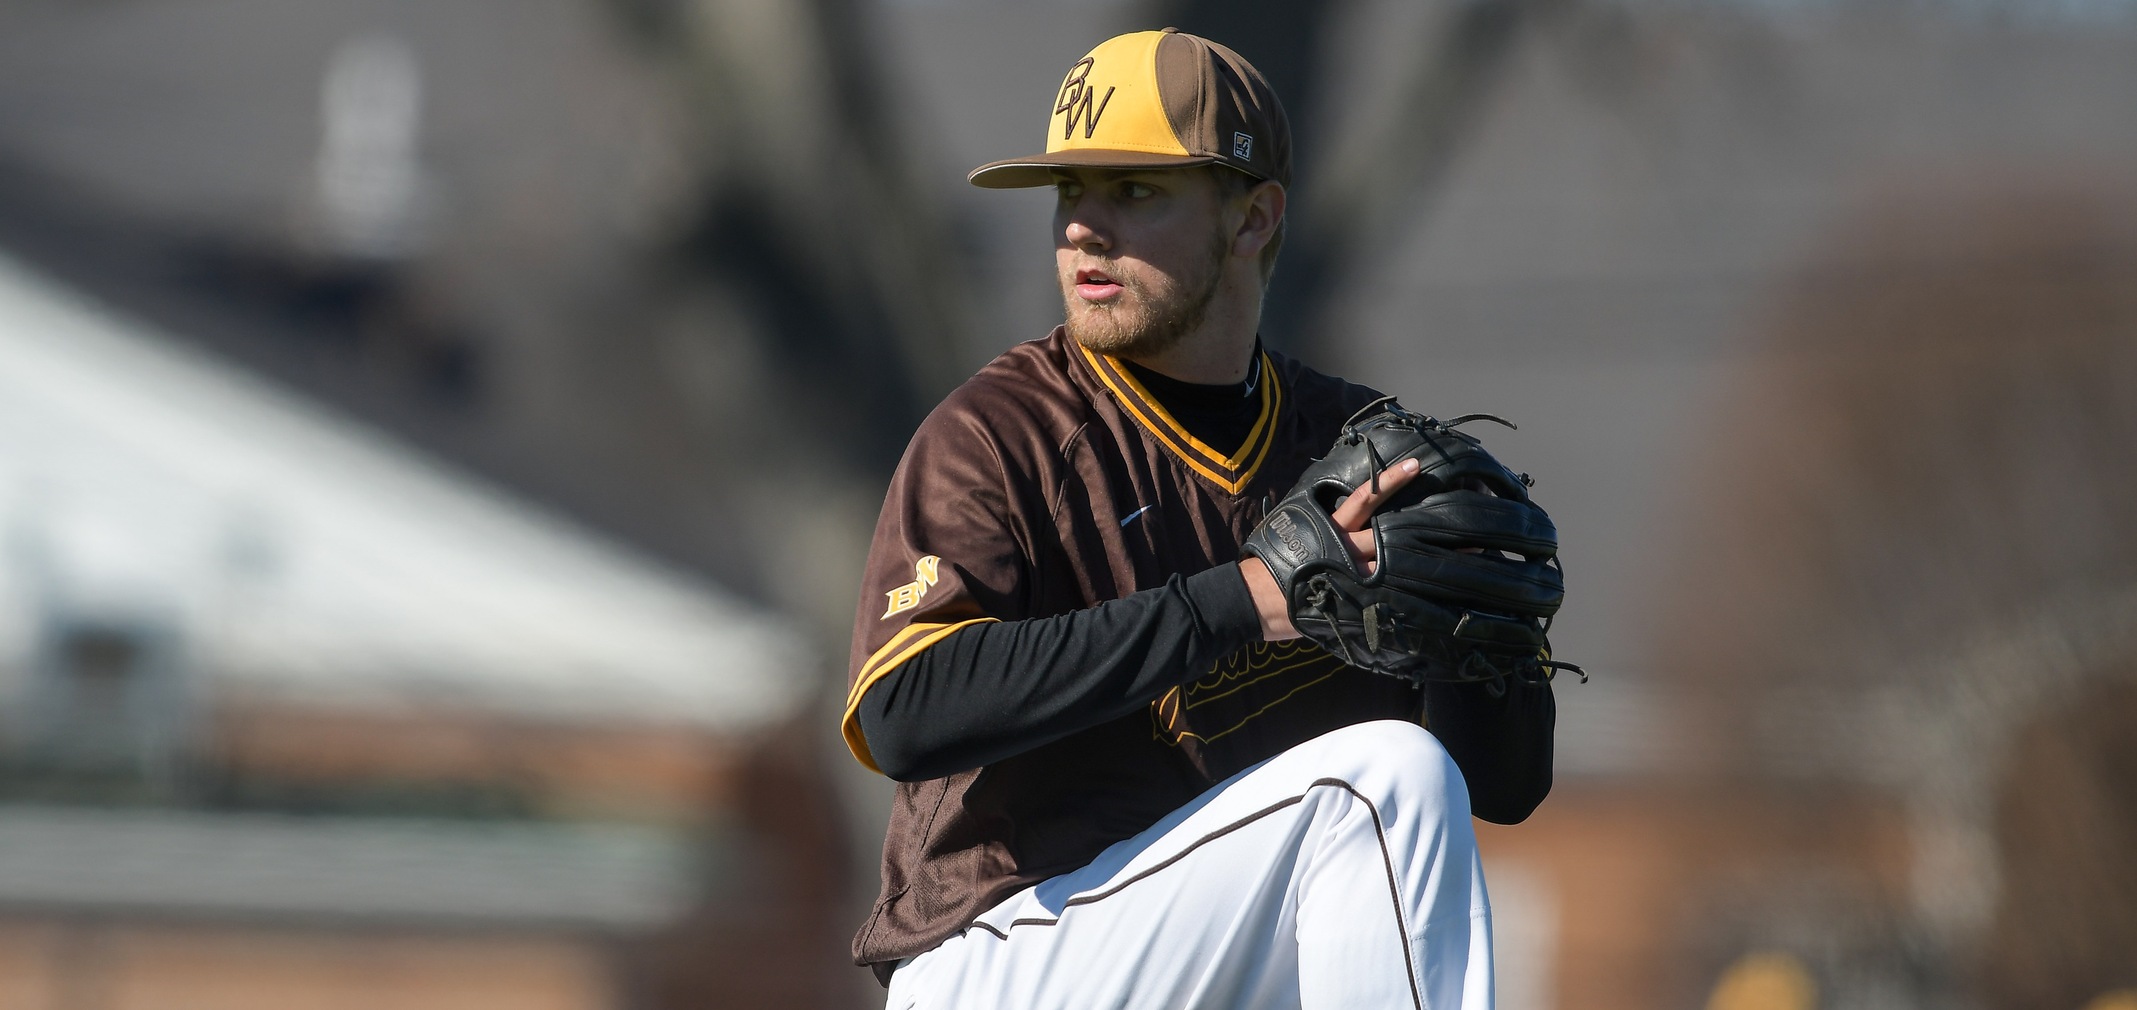 Junior Michael Hubert earned the save in the victory over Kean